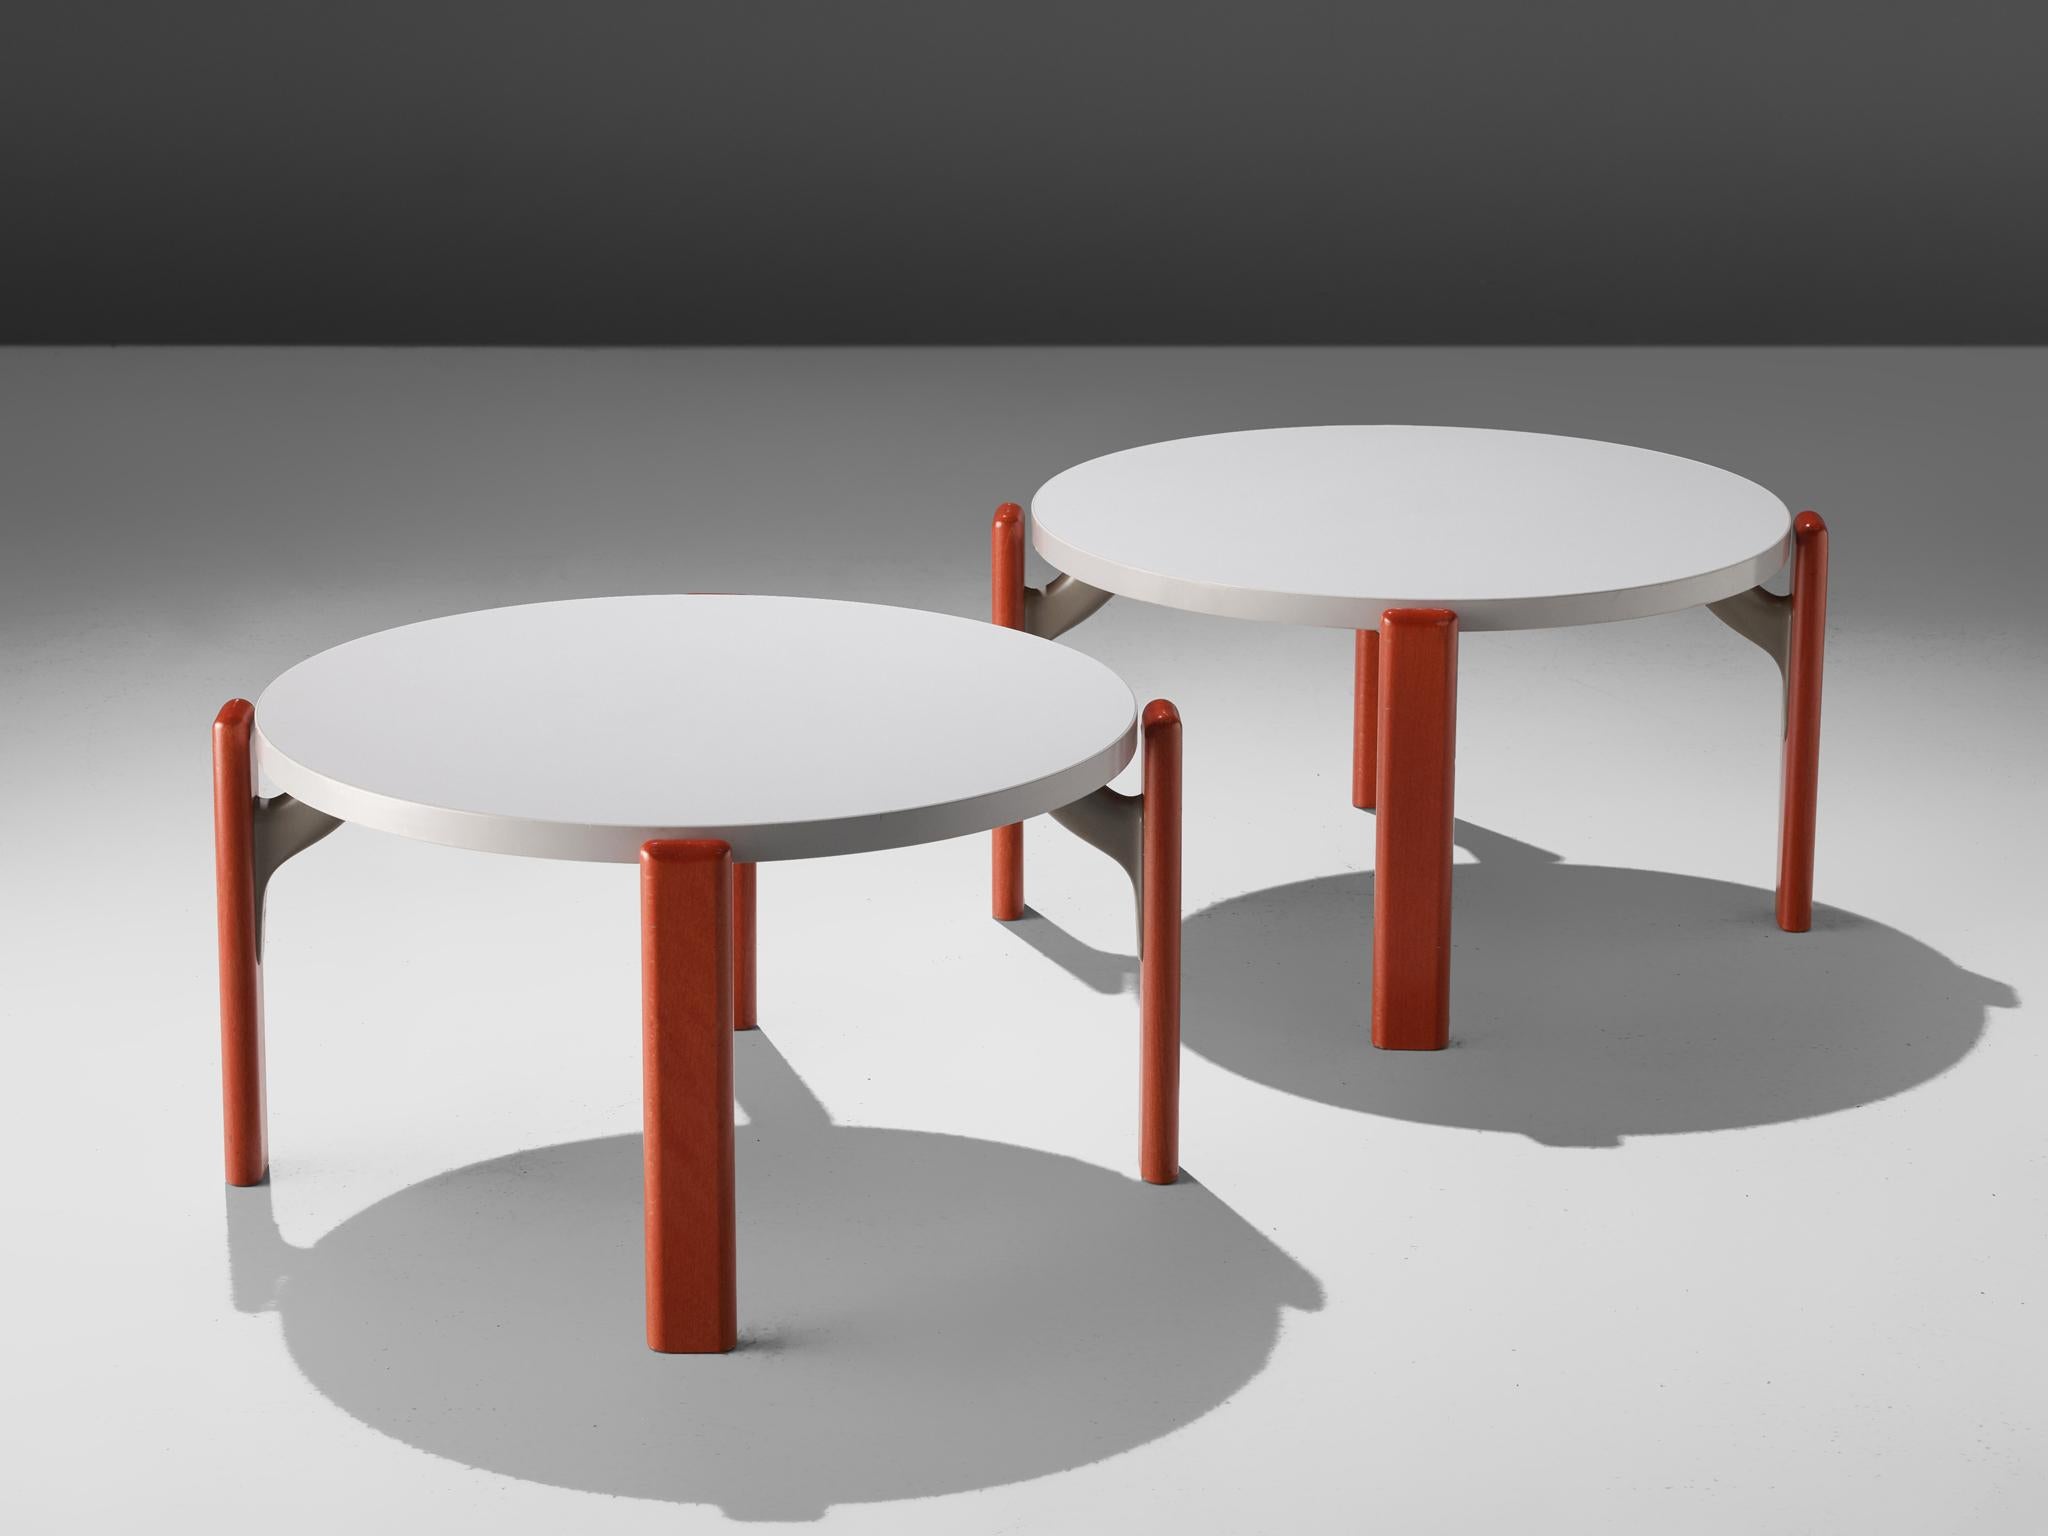 Bruno Rey for Dietiker, pair of coffee tables, plywood, Switzerland, 1970s

These coffee tables feature four red lacquered legs and a round white table top. A grey connection hold the legs and the top together. Special features it the